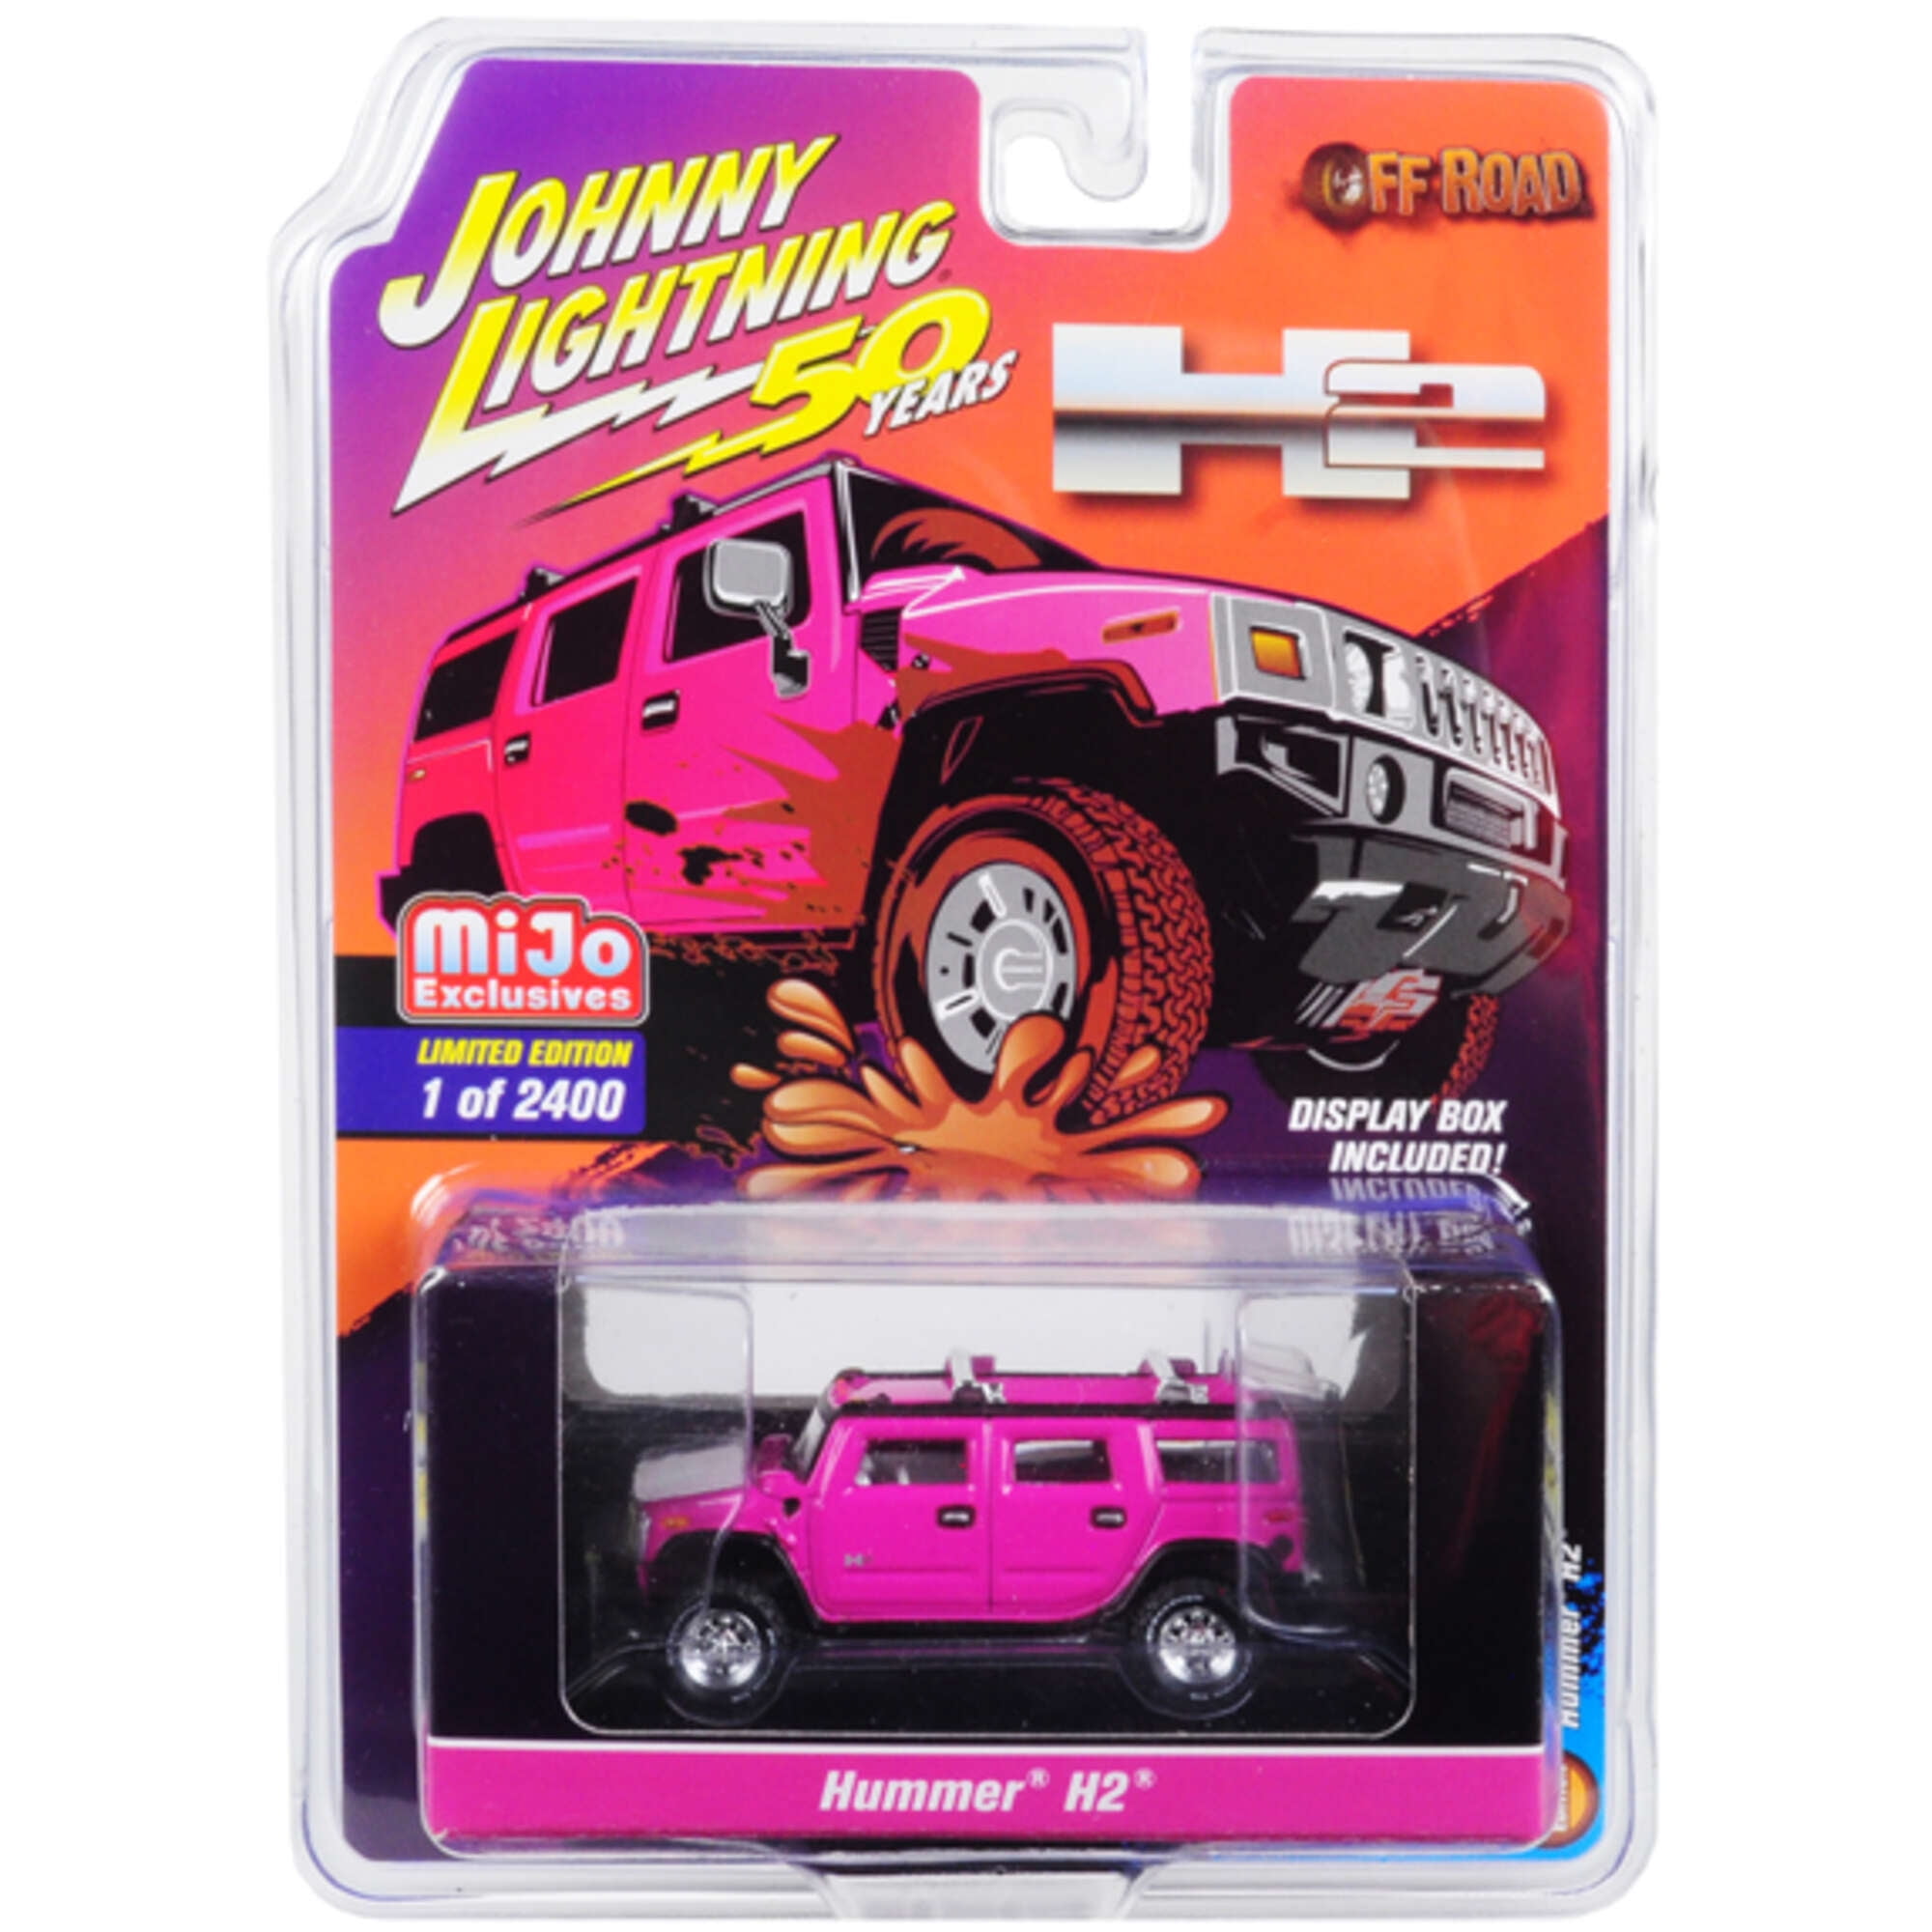 Jlcp7210 Hummer H2 Off-road 50th Anniversary Limited Edition Car, Pink - 2400 Piece